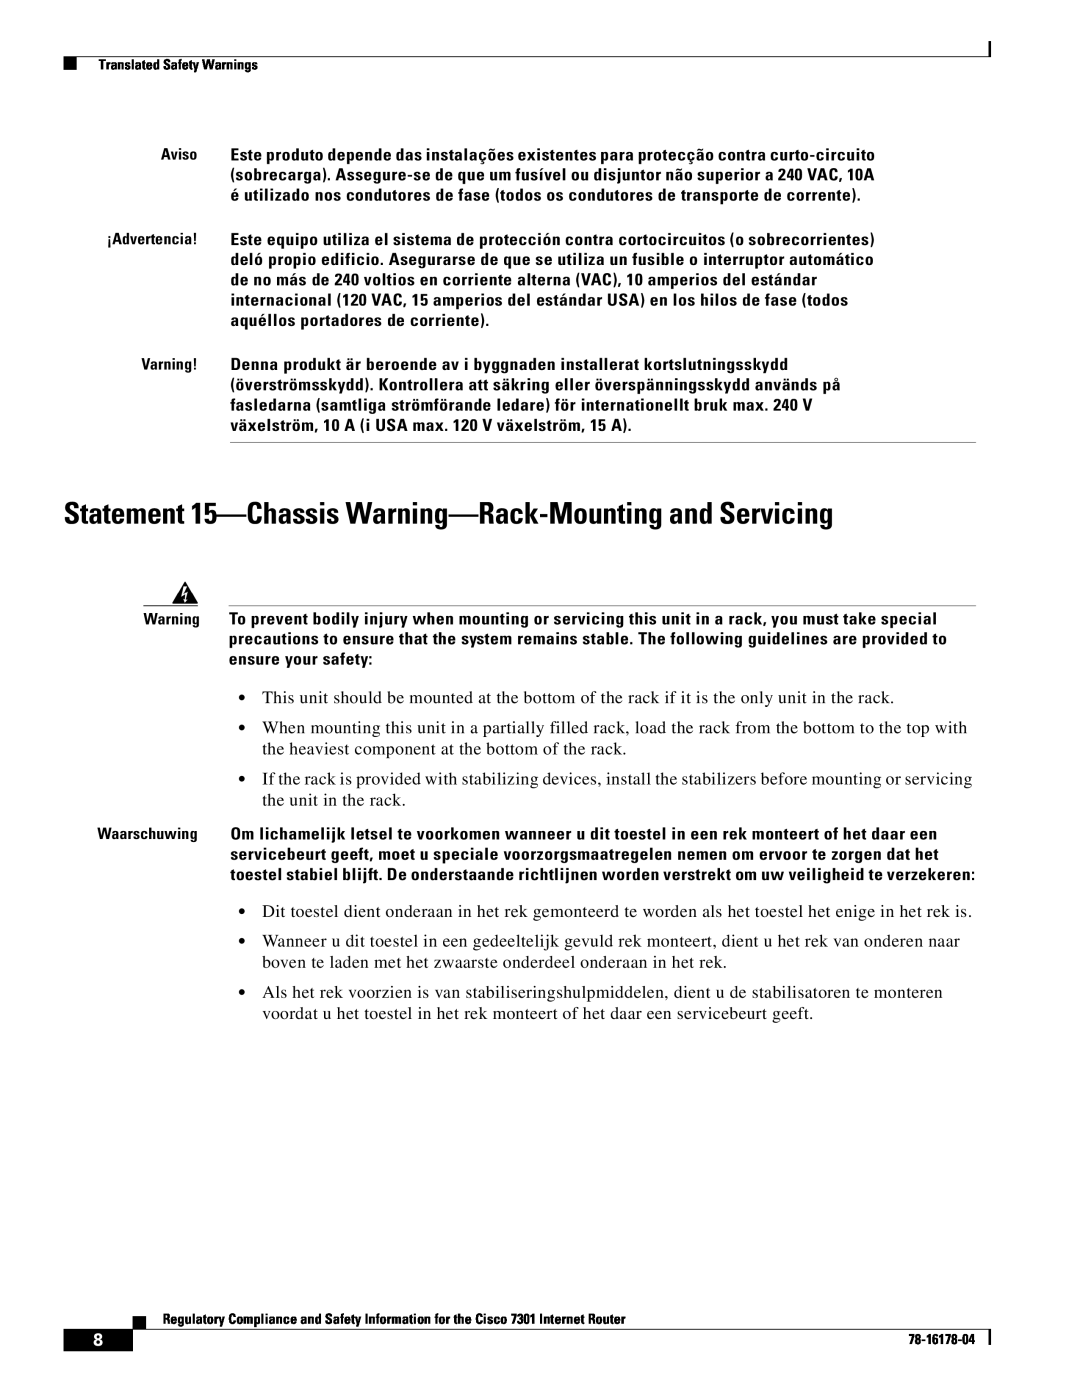 Cisco Systems CISCO7301 manual Statement 15-Chassis Warning-Rack-Mounting and Servicing 